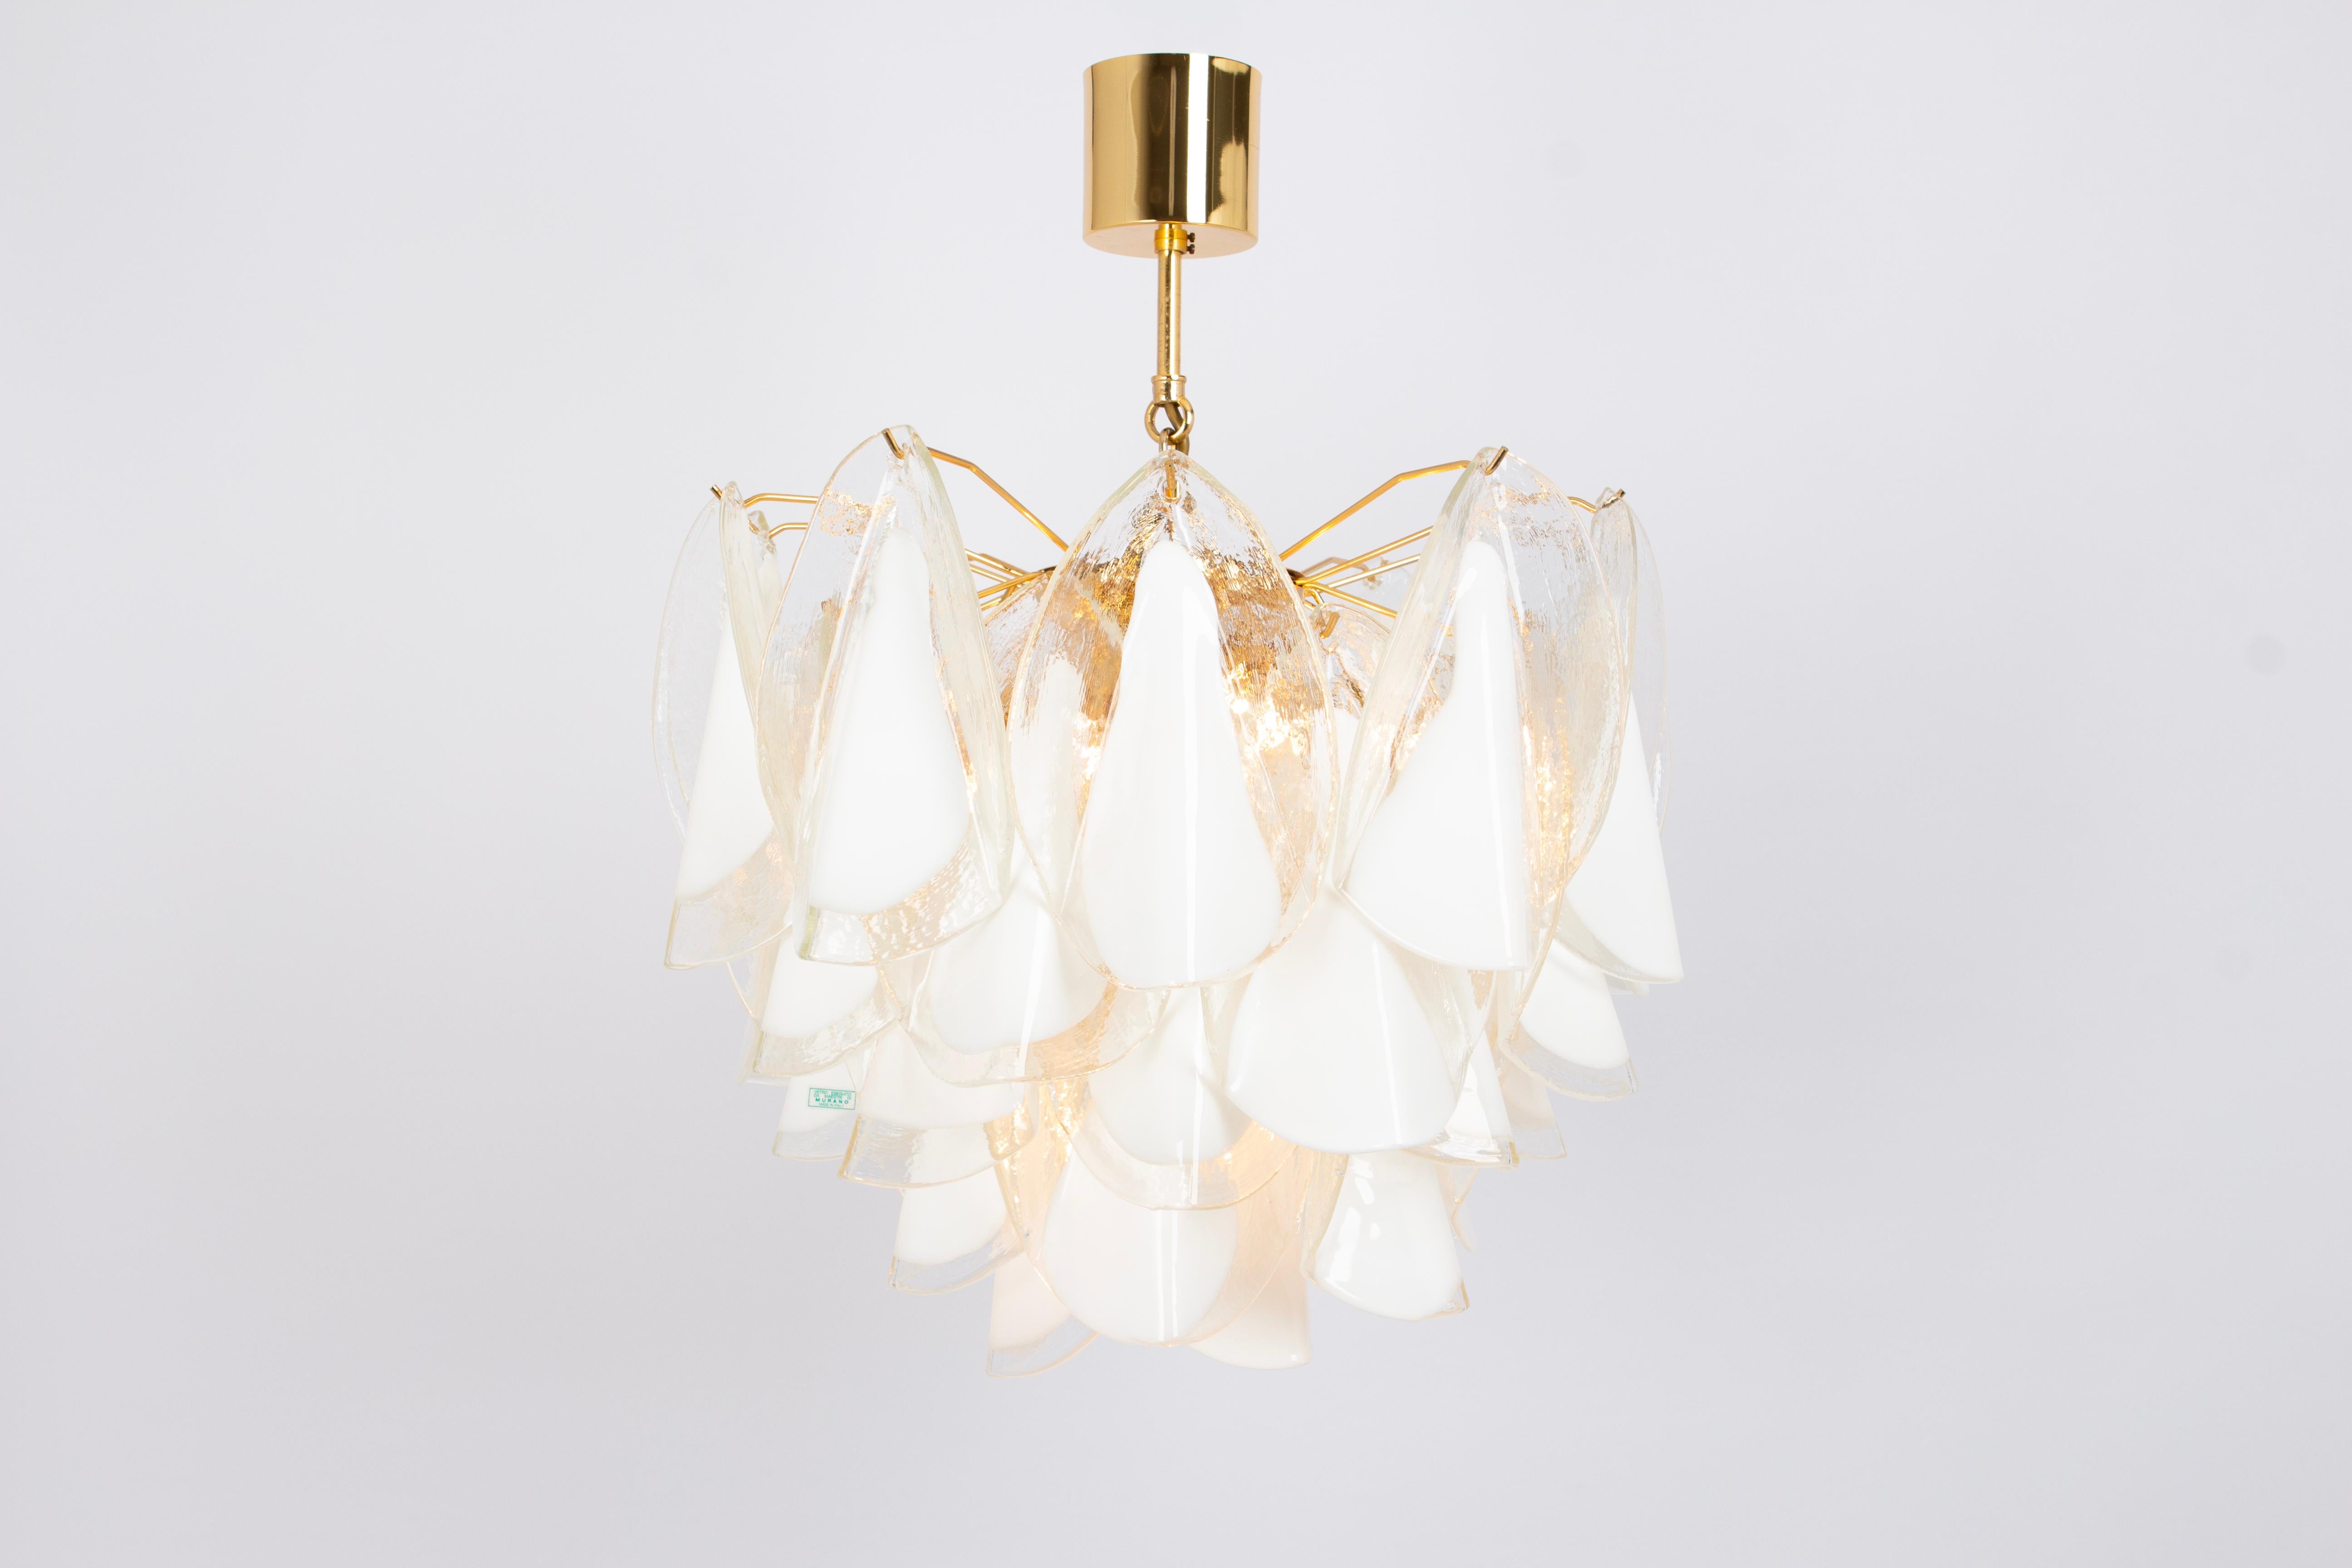 A stunning Murano glass chandelier designed by Carlo Nason for Mazzega, Italy, manufactured in the 1970s.
The chandelier is composed of many thick textured glass elements attached to a gilt brass frame.

High quality, very good condition. Cleaned,